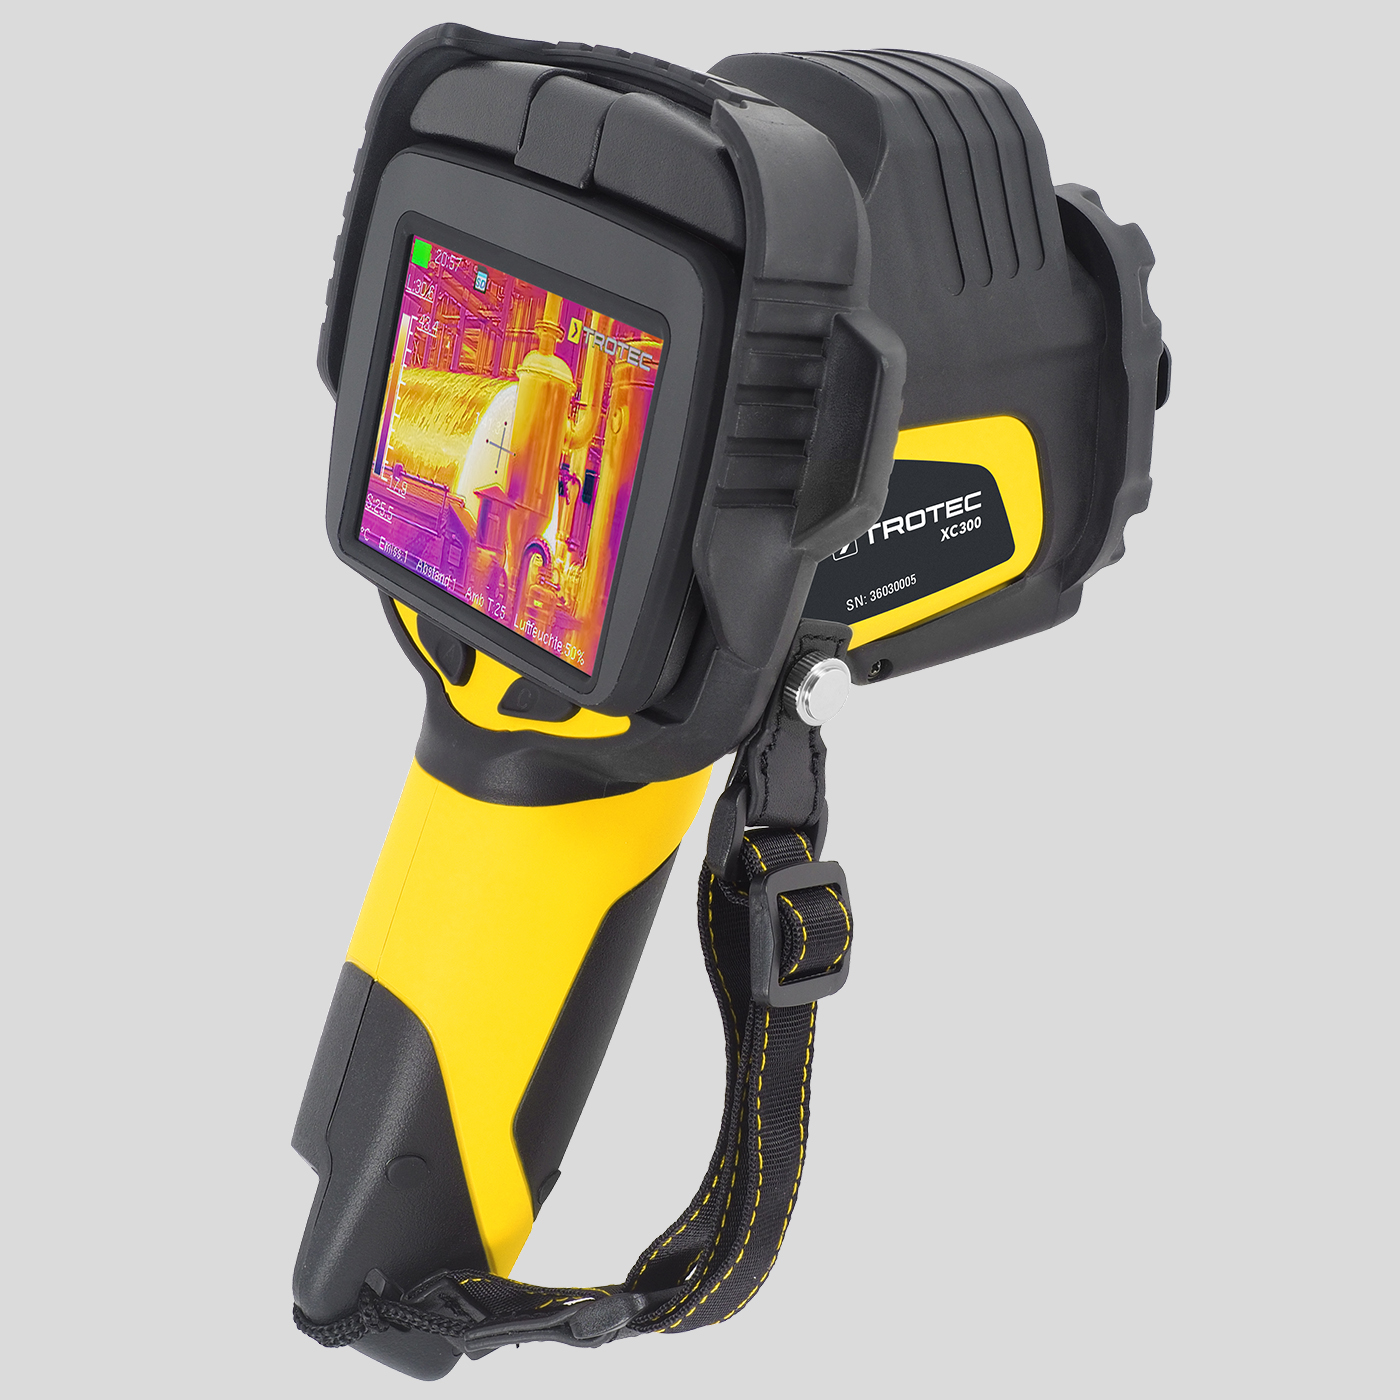 Thermal Imaging Camera Xc300 High Resolution Thermography System Trotec